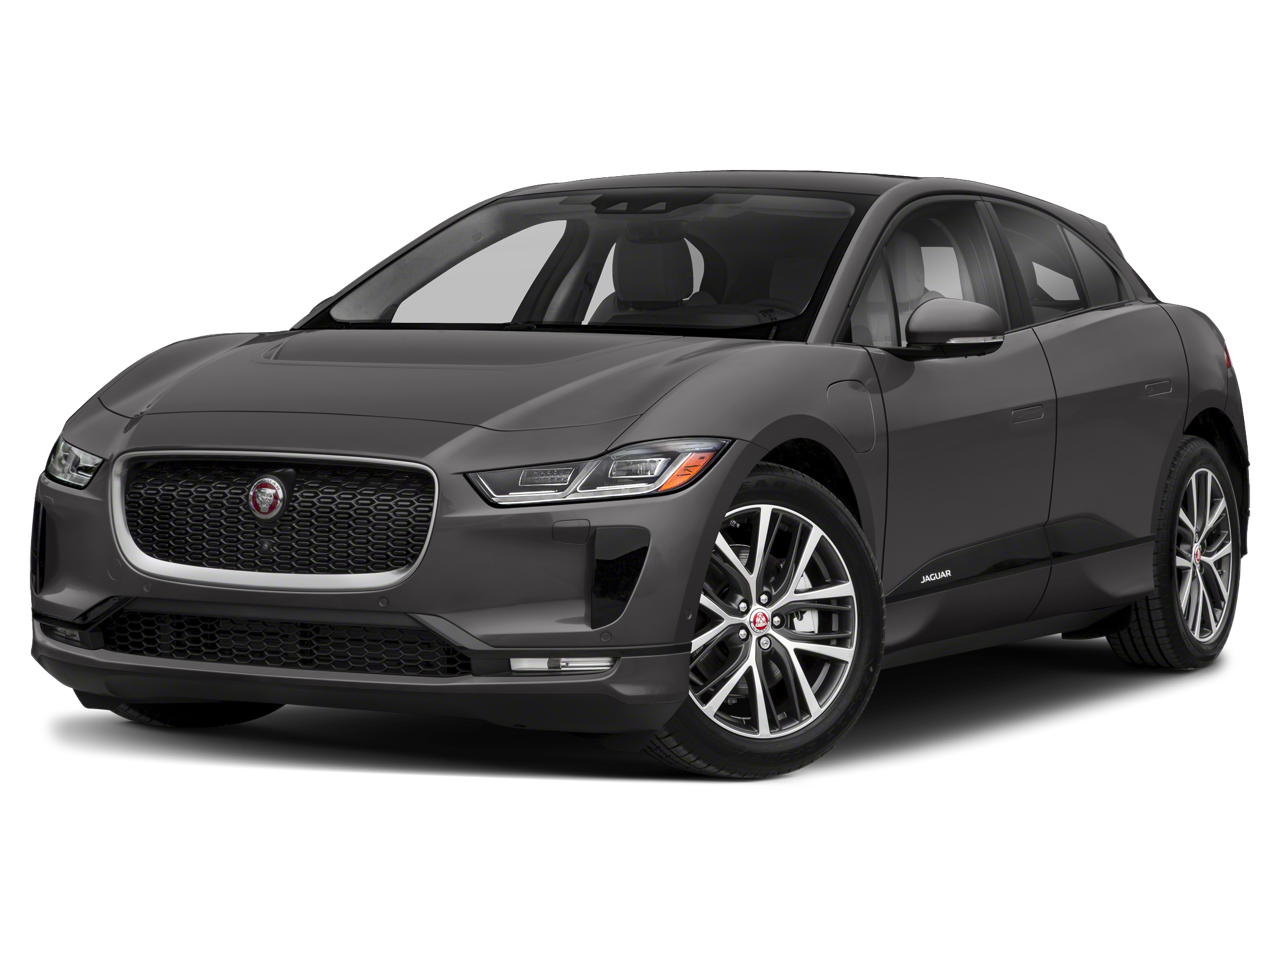 Used 2019 Jaguar I-PACE First Edition with VIN SADHD2S1XK1F76711 for sale in Columbus, OH